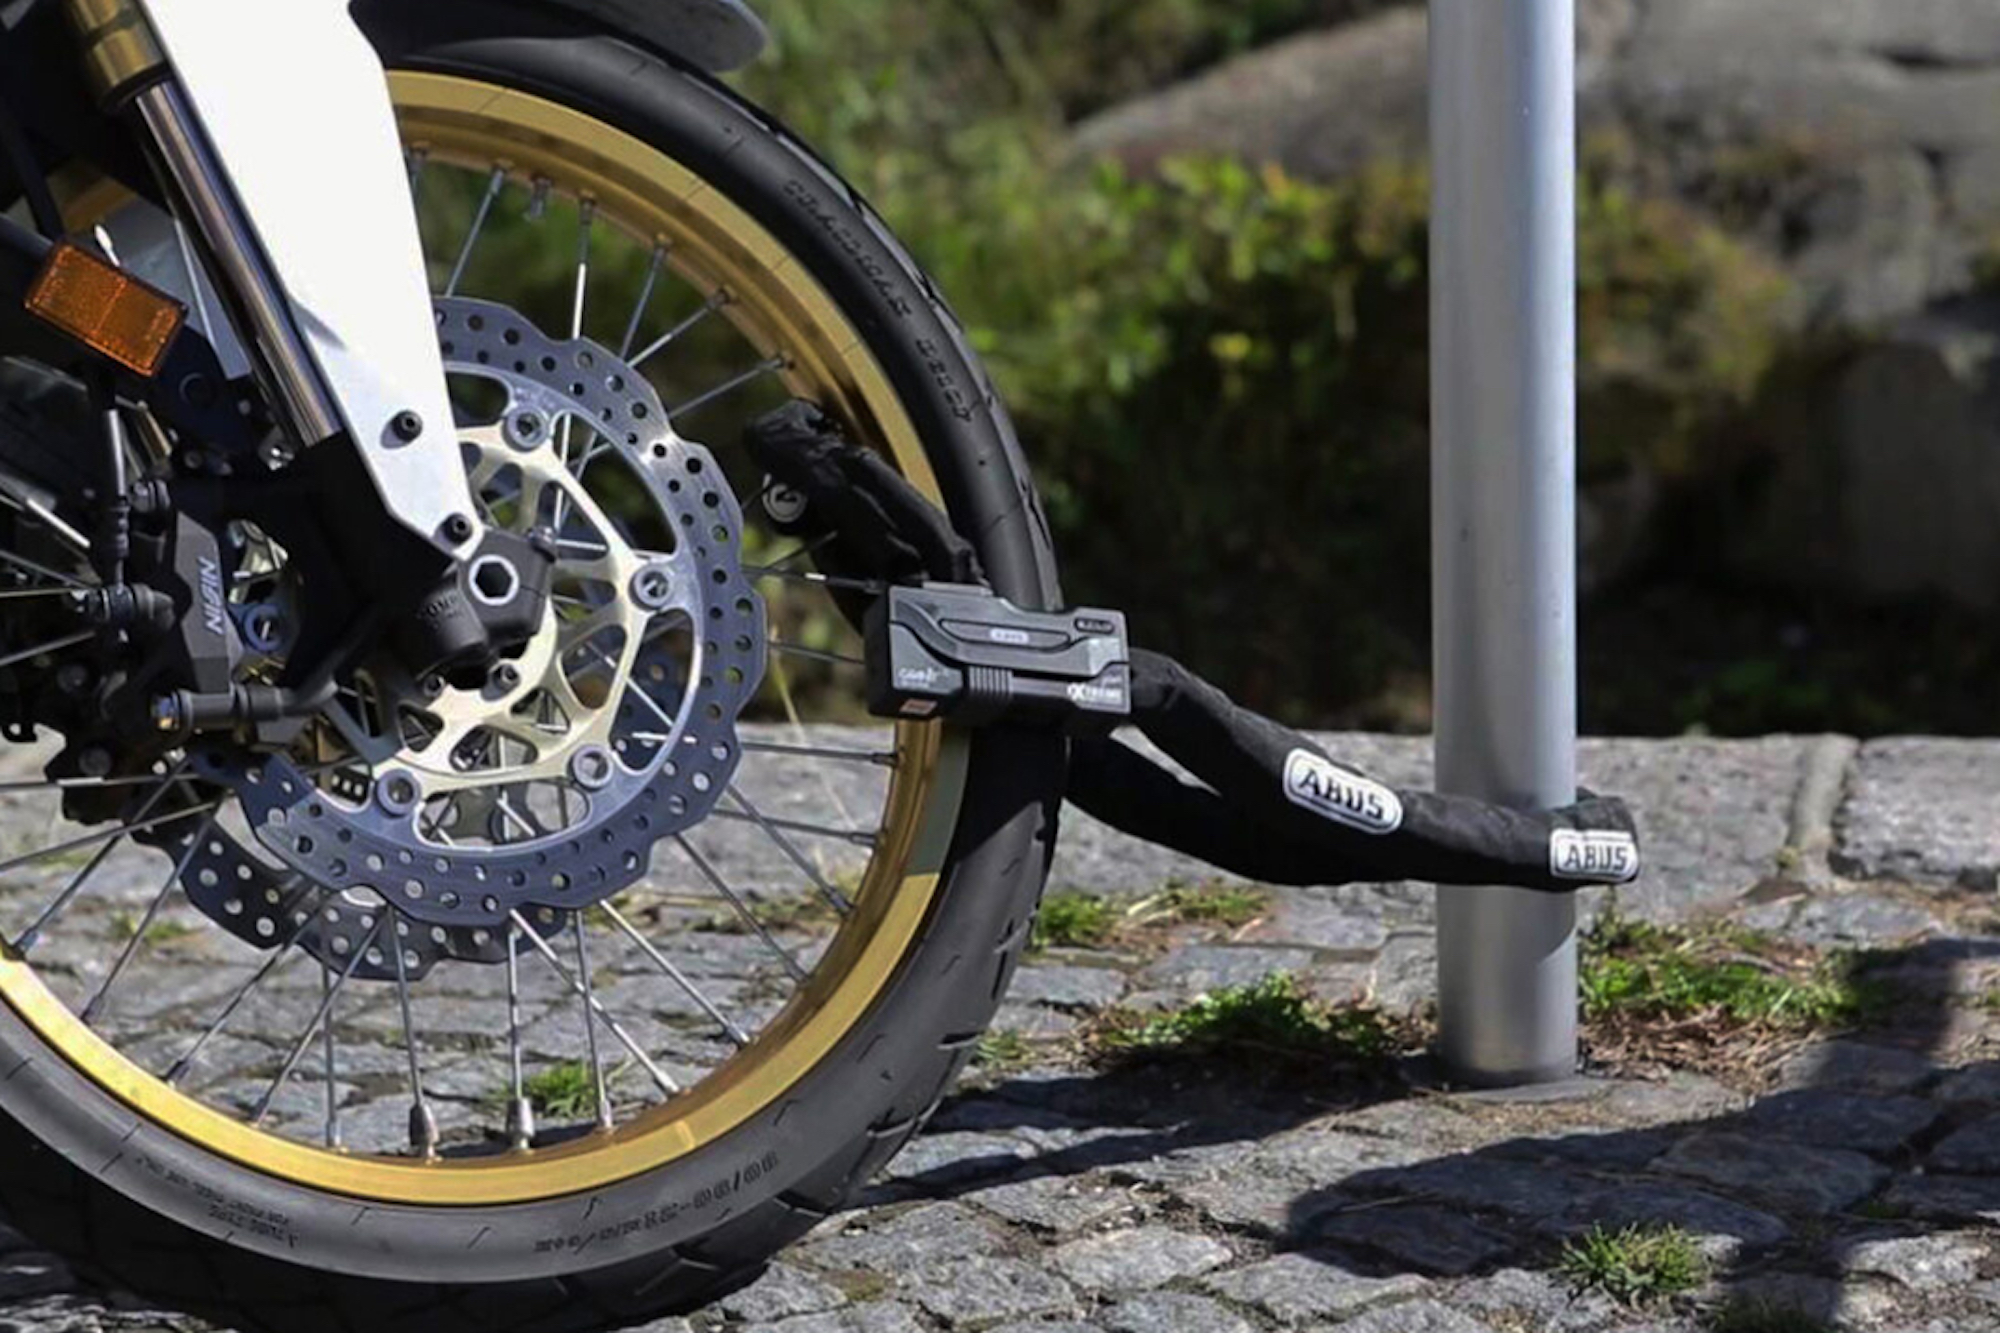 A view of a motorcycle lock. Media sourced from HiConsumption.